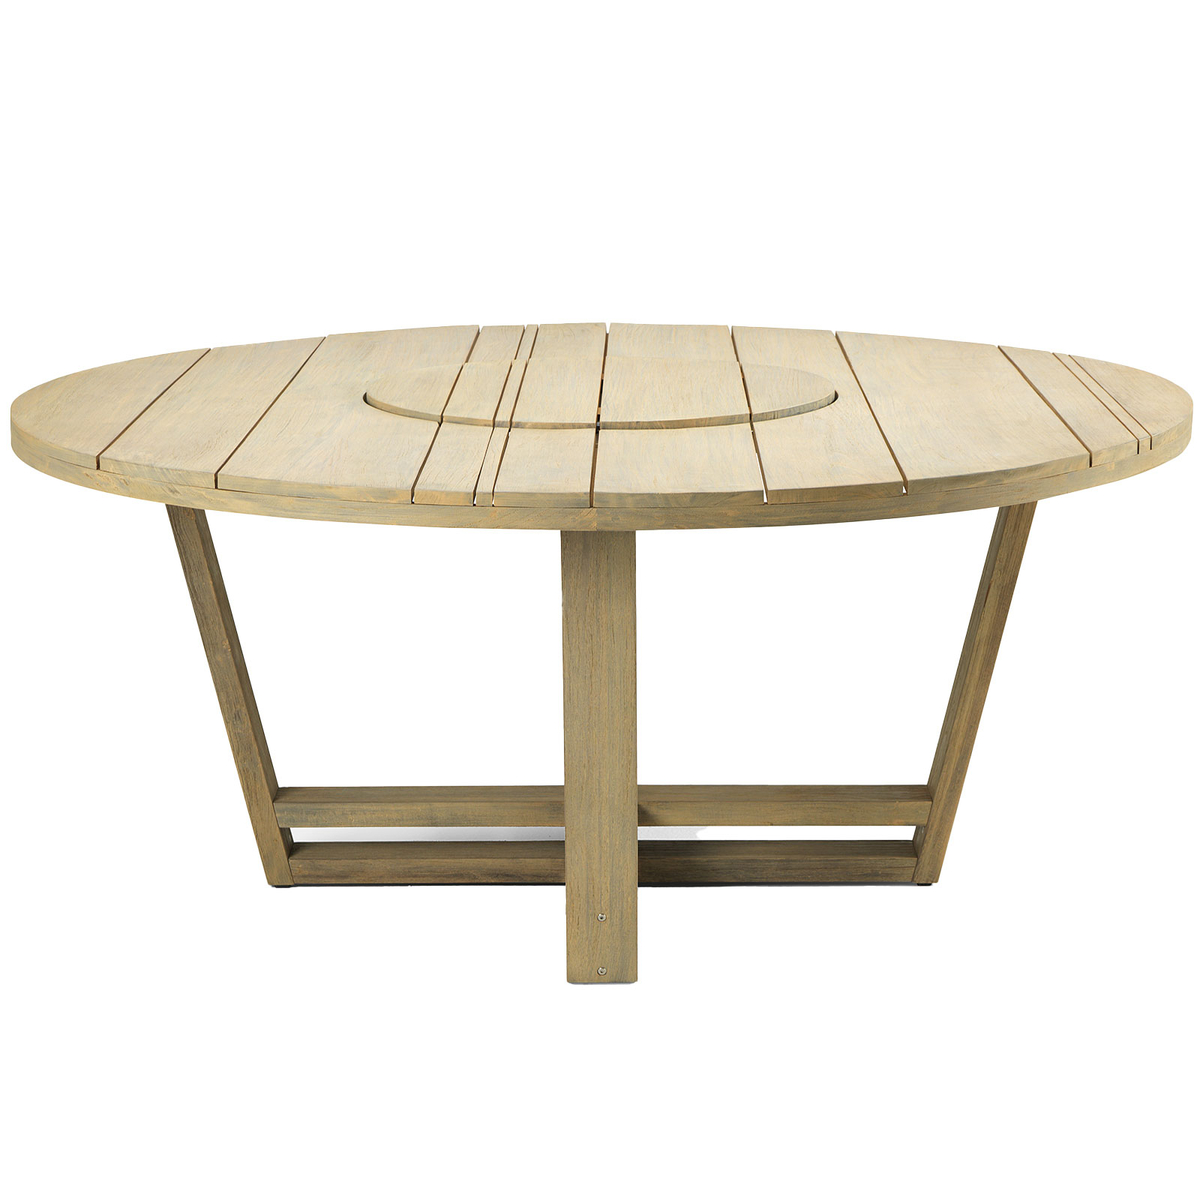 Costes Teak Outdoor Dining Table